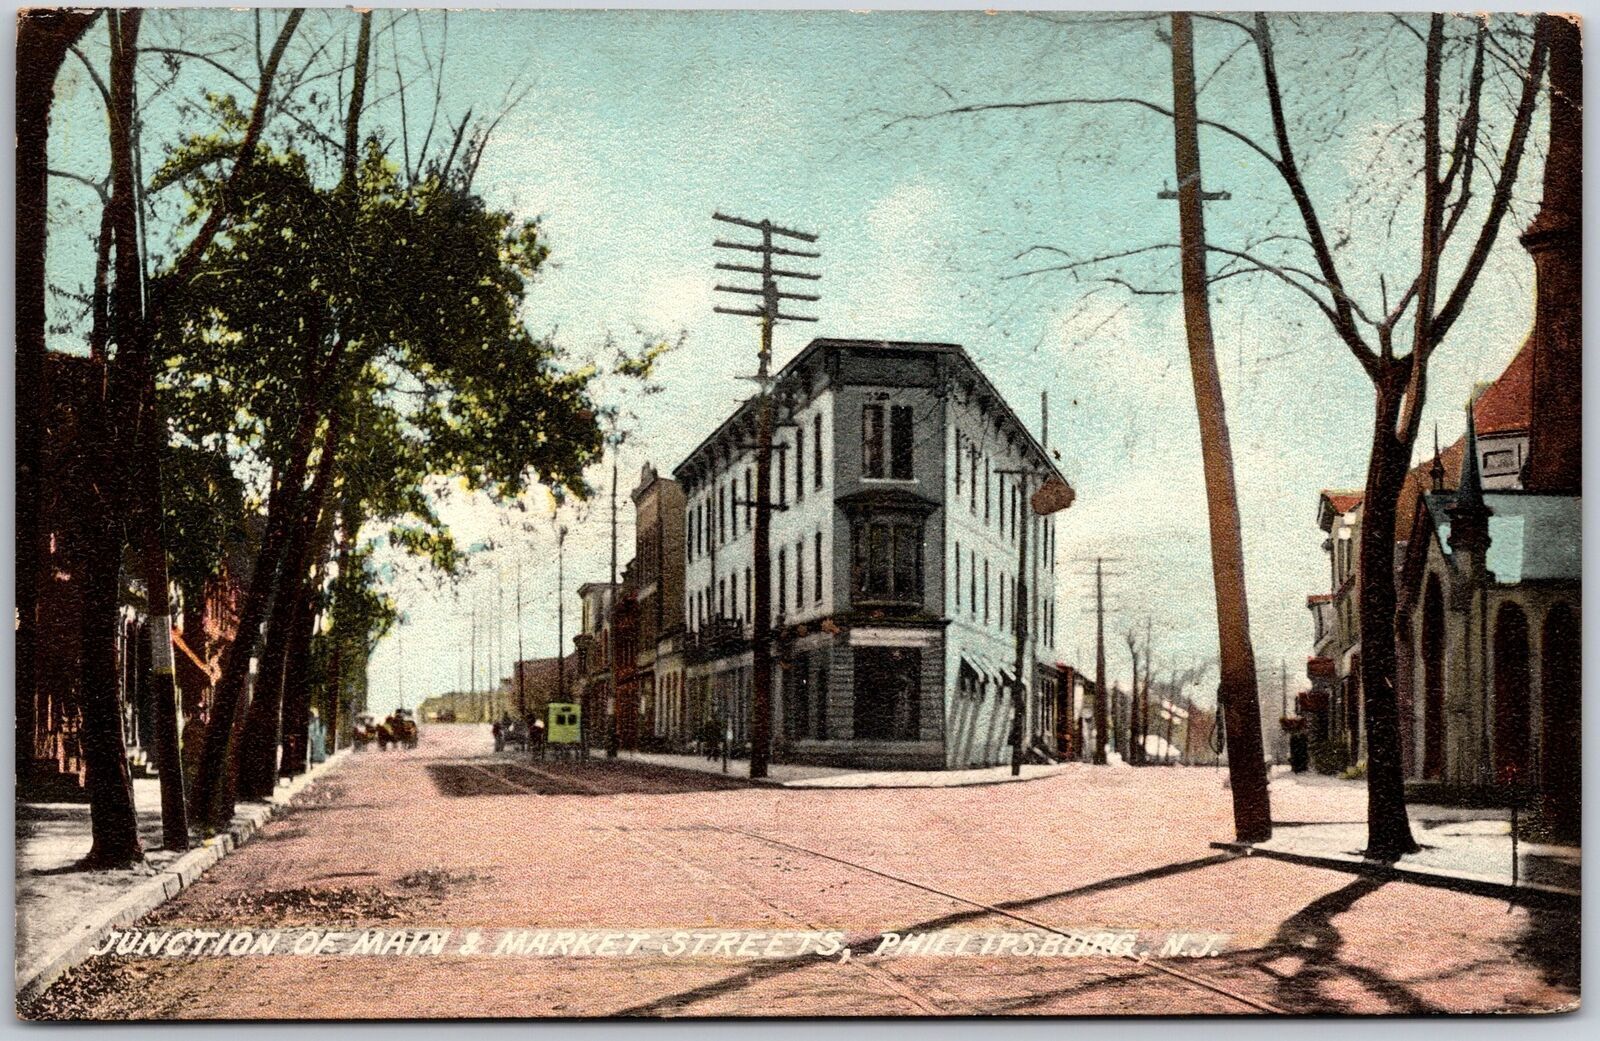 Junction of Main and Market Streets Phillipsburg New Jersey NJ Building Postcard